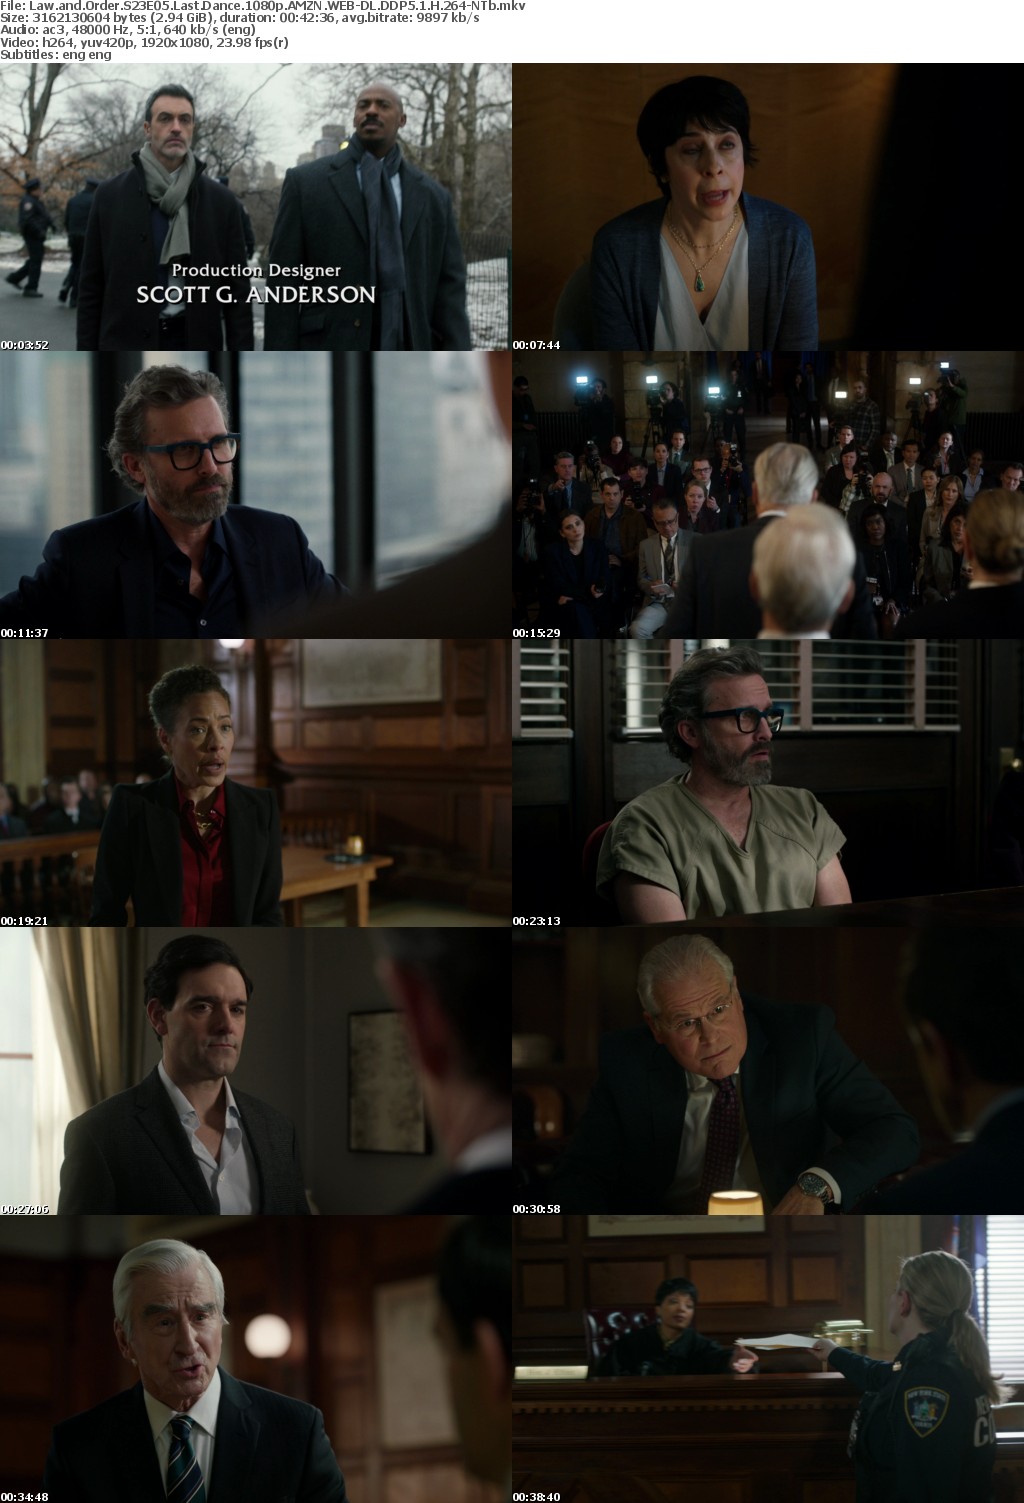 Law and Order S23E05 Last Dance 1080p AMZN WEB-DL DDP5 1 H 264-NTb